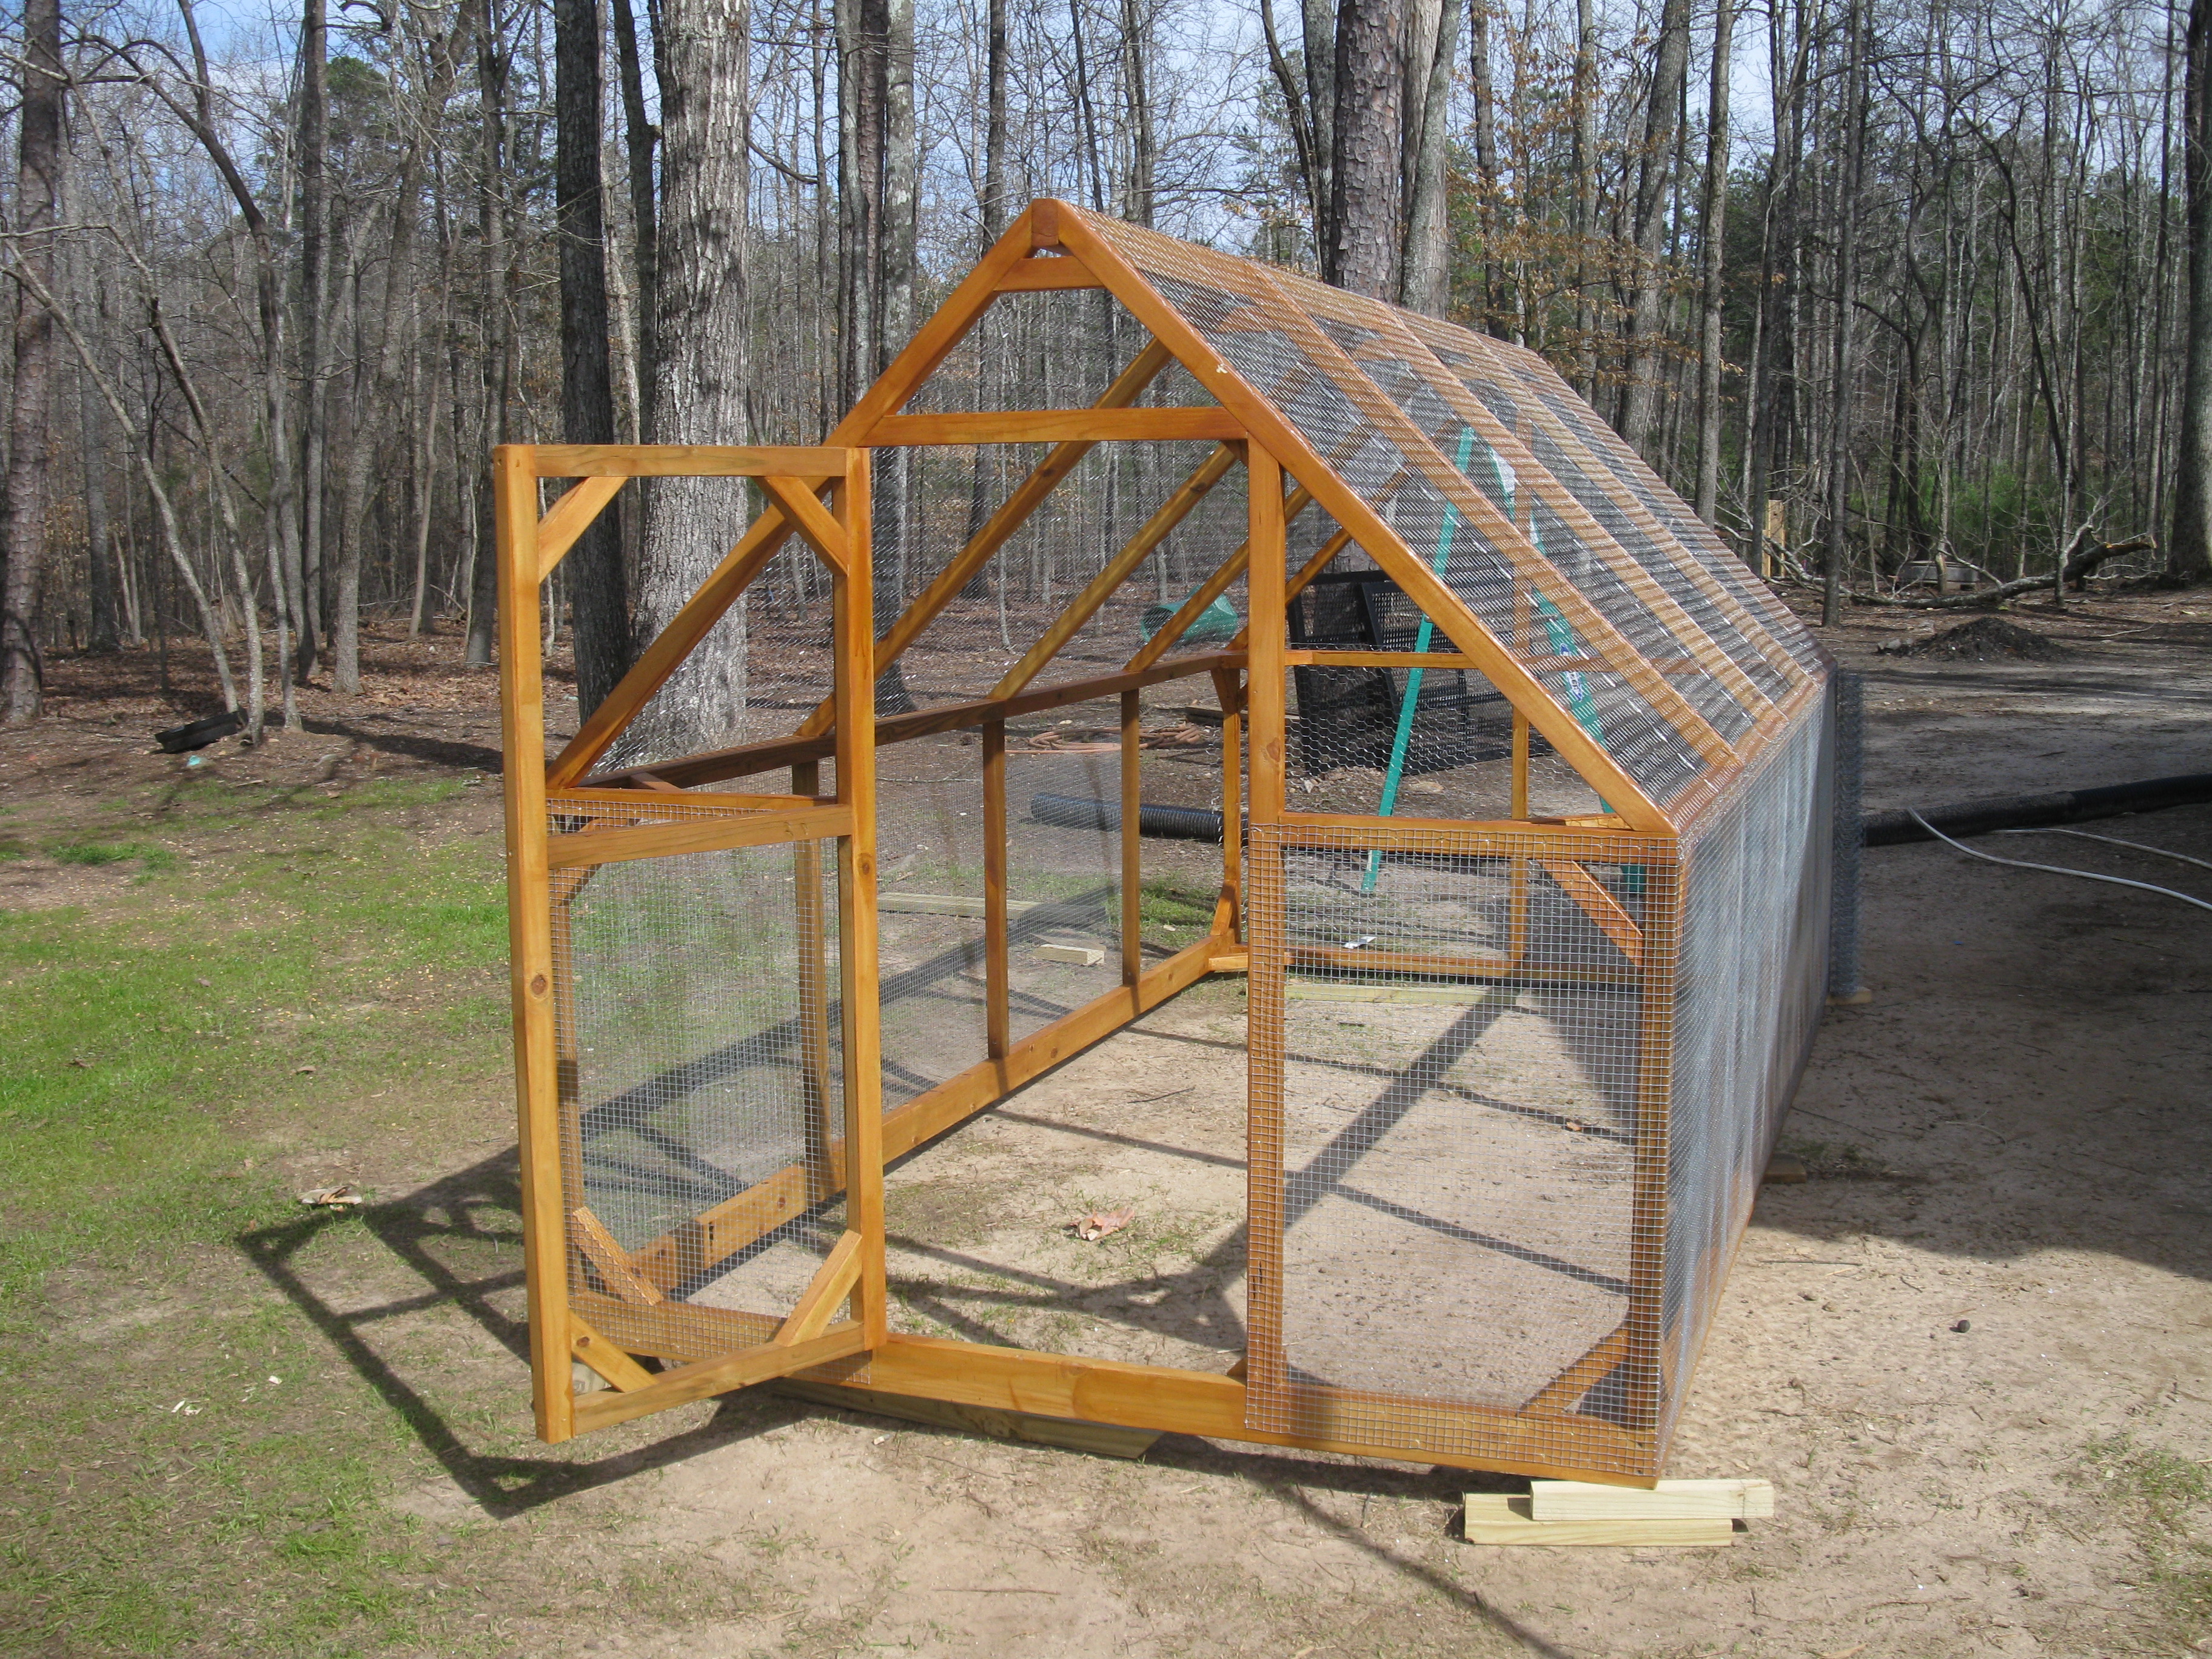 This run is 6' X 12' and 6' high in the center.  Made of treated 2x2's with 2x4's for the ridge board and base boards.  I used 1/2" hardware cloth for the lower section and 1" chicken wire for everything else.  Two people can move this without any problem. I used an air stapler (used for installing wood trim) to attach the wire to the framing.  Used spring hinges on the door.